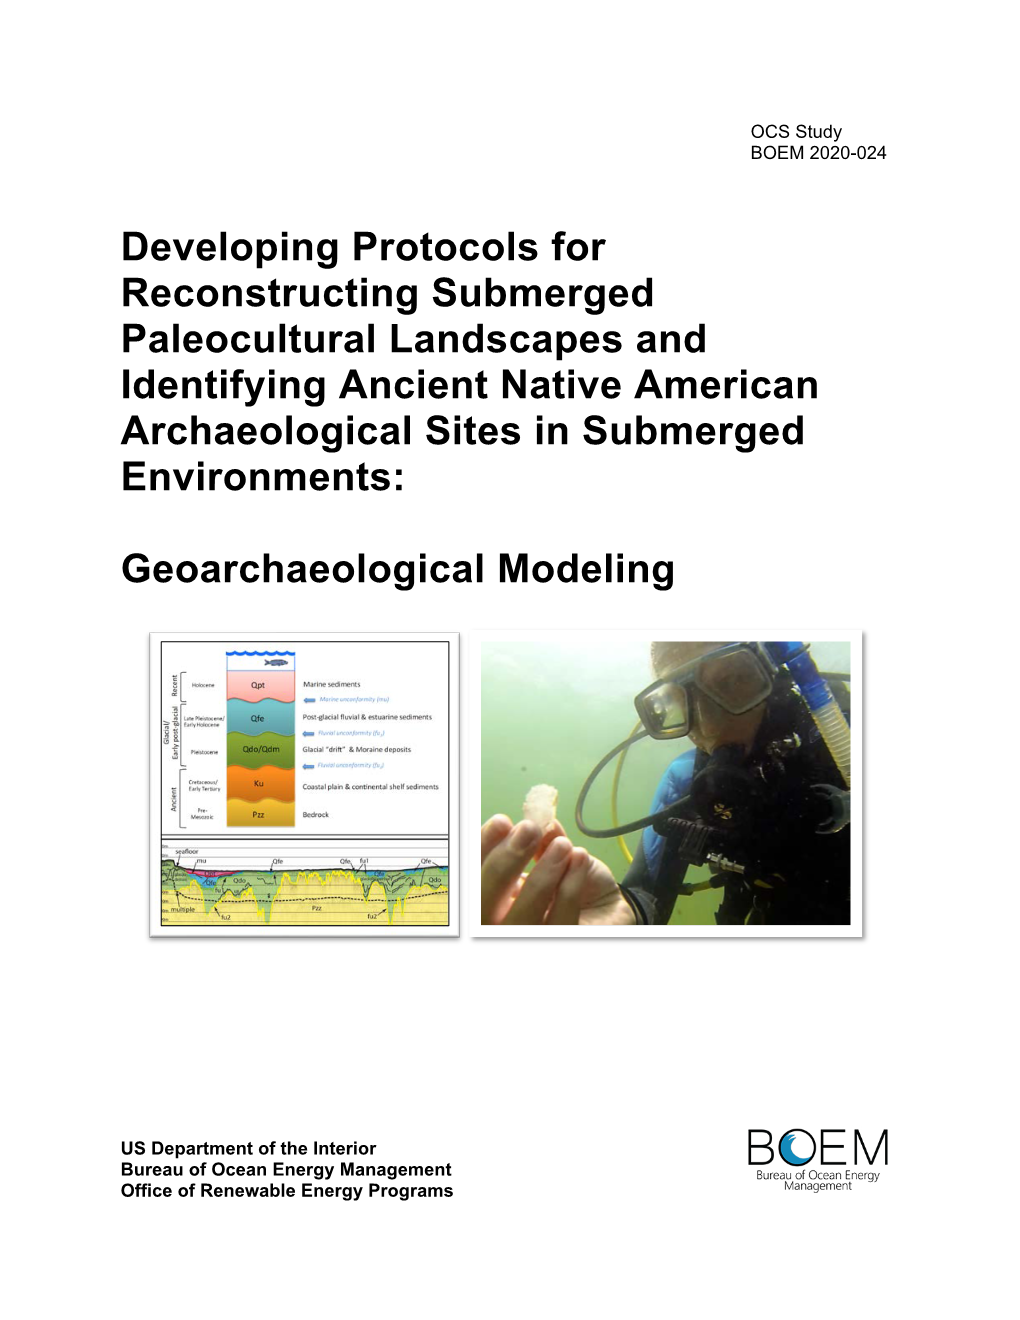 Developing Protocols for Reconstructing Submerged Paleocultural Landscapes and Identifying Ancient Native American Archaeological Sites in Submerged Environments